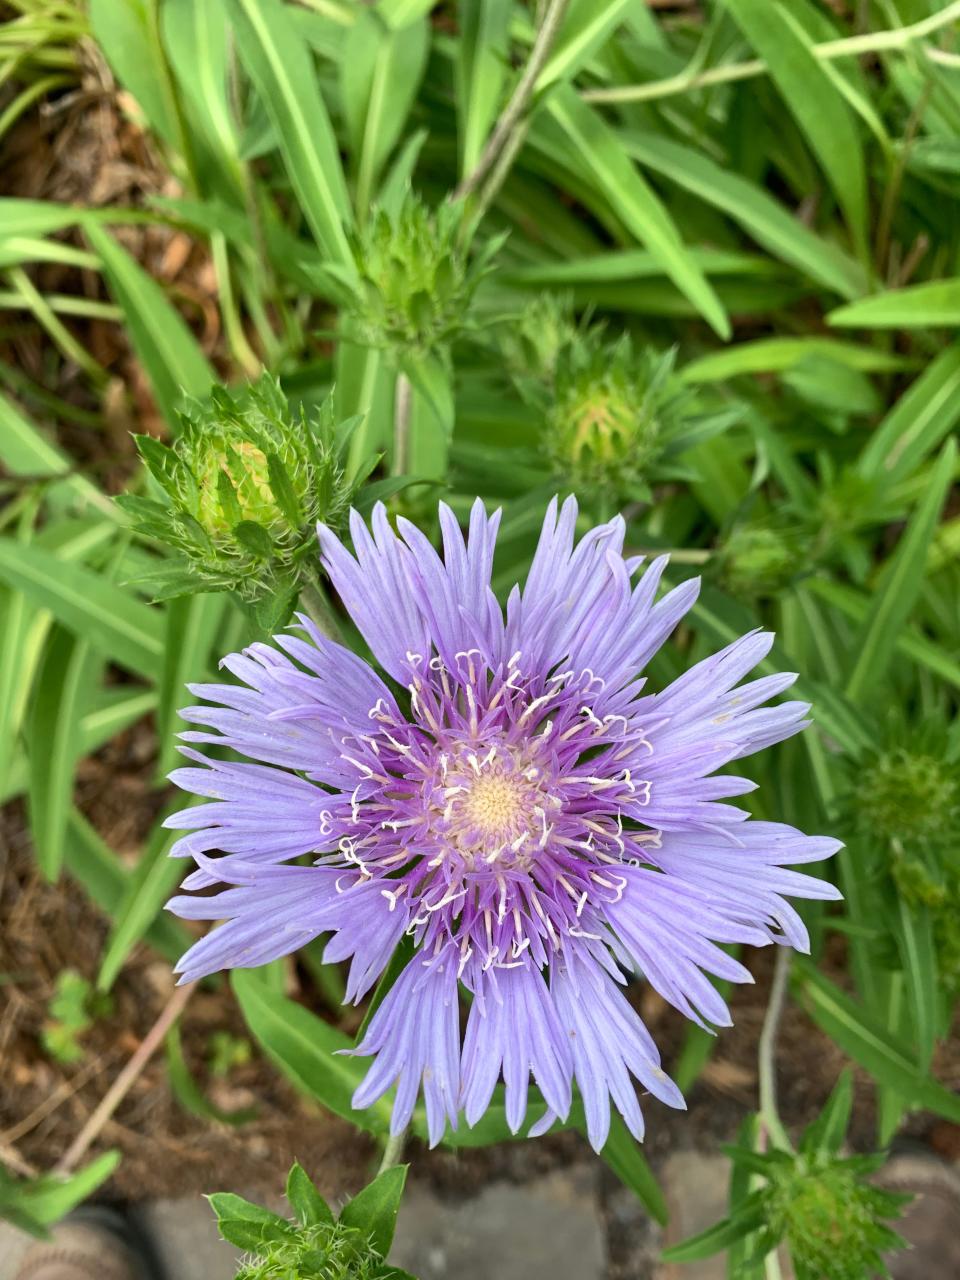 Stokesia laevis or Stokes' aster sports large blooms in the late spring.